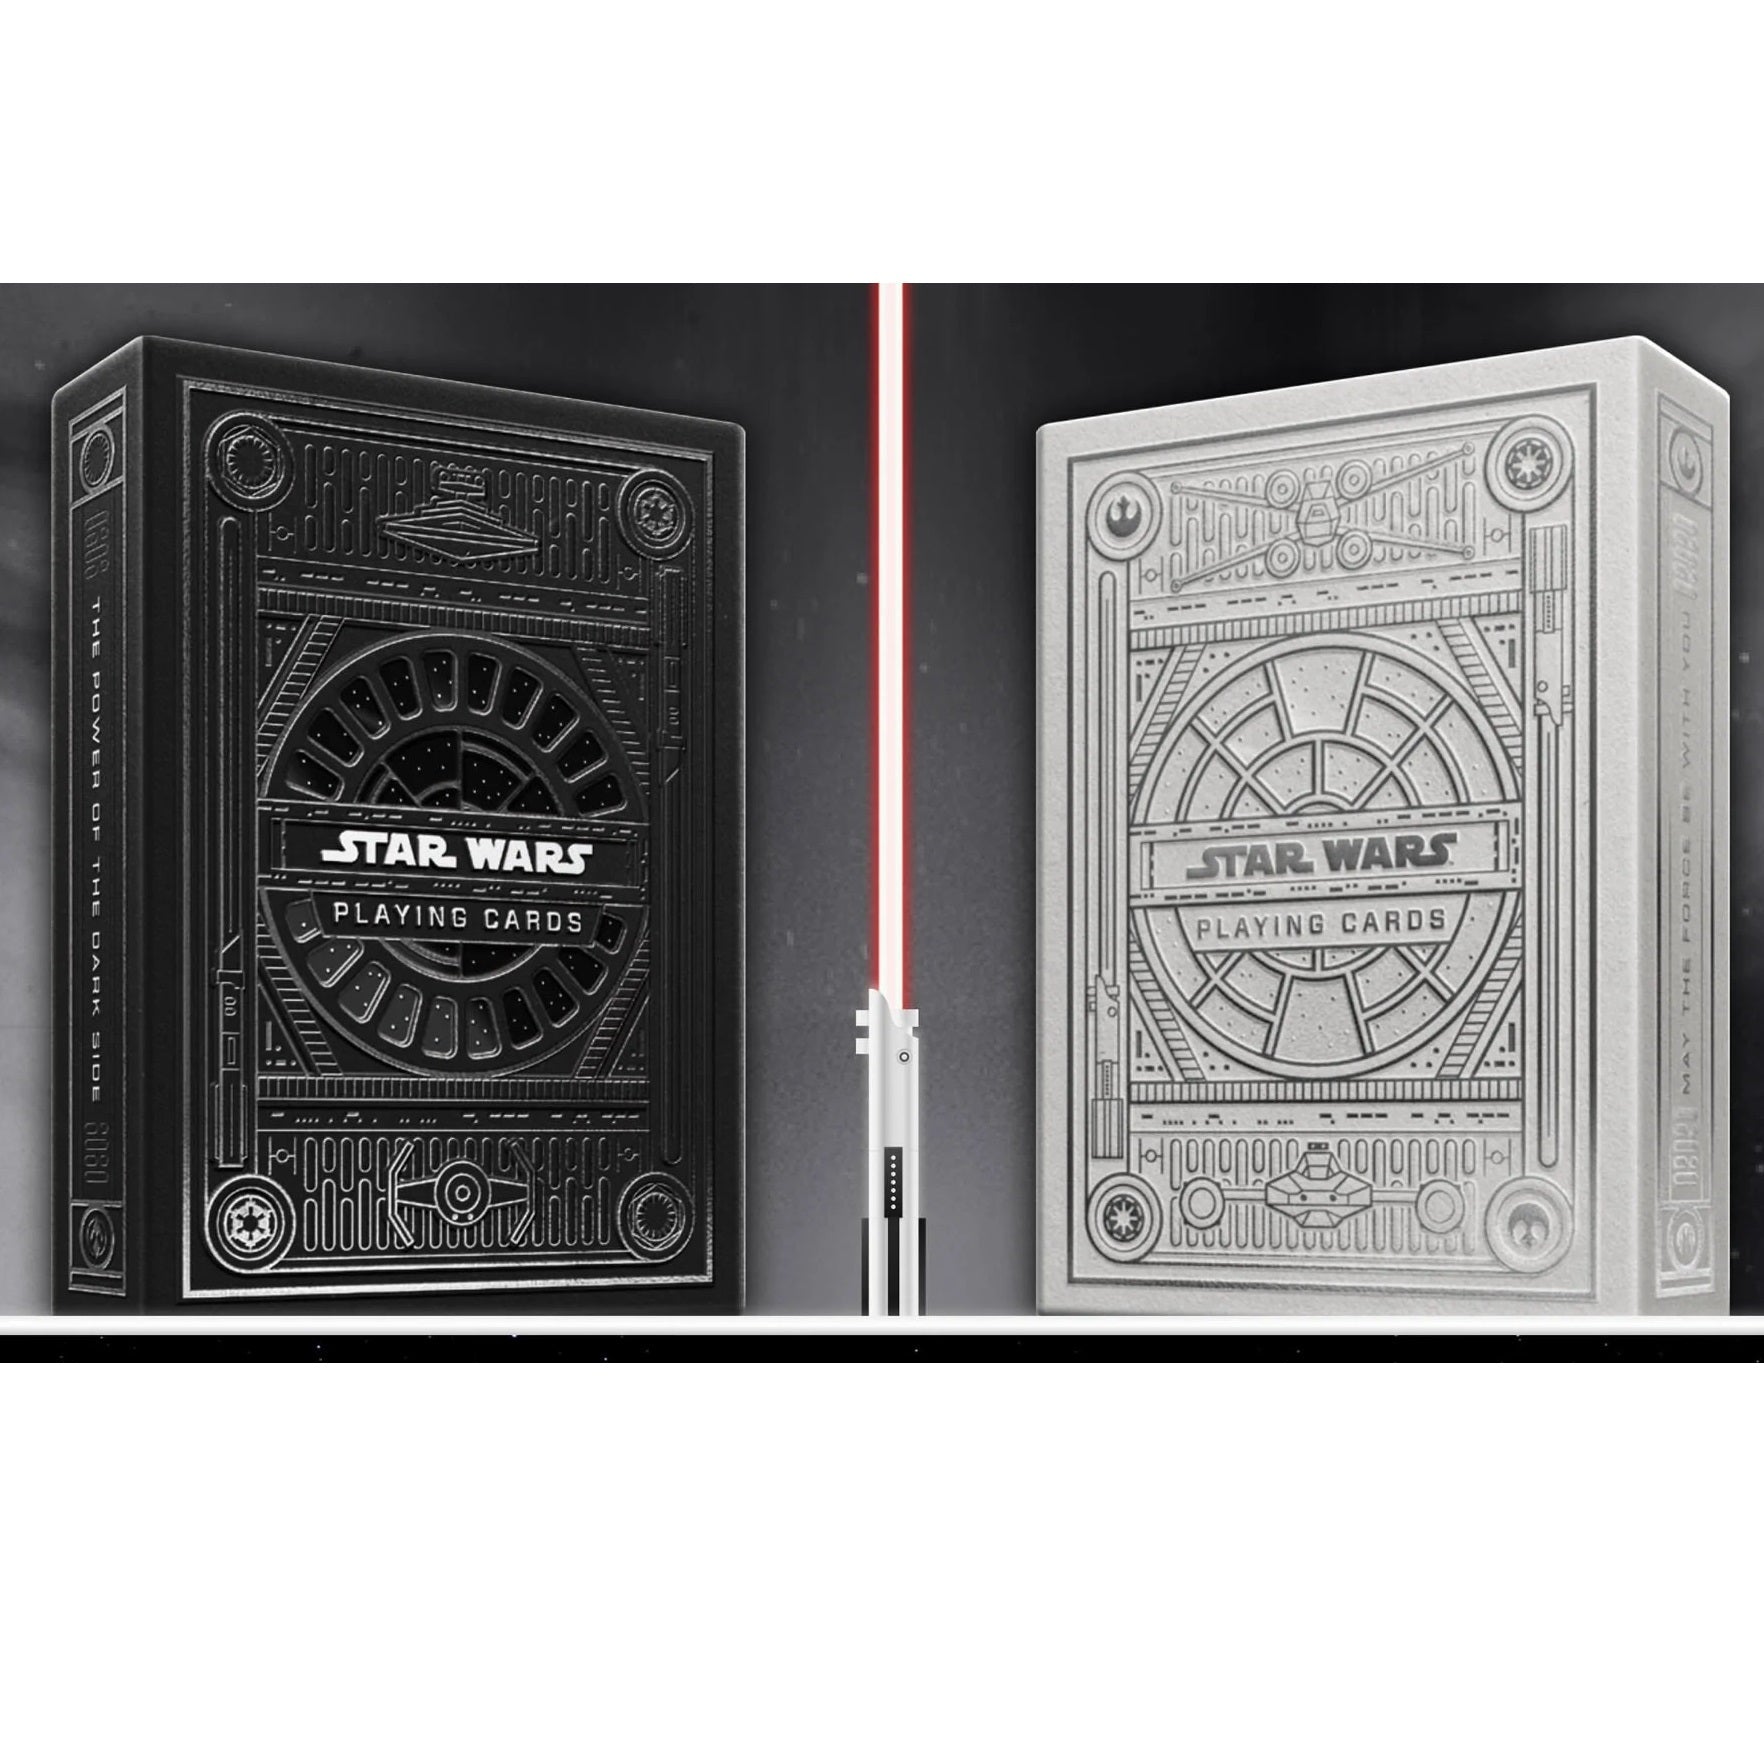 Star Wars Playing Cards By Theory11-Red-United States Playing Cards Company-Ace Cards & Collectibles